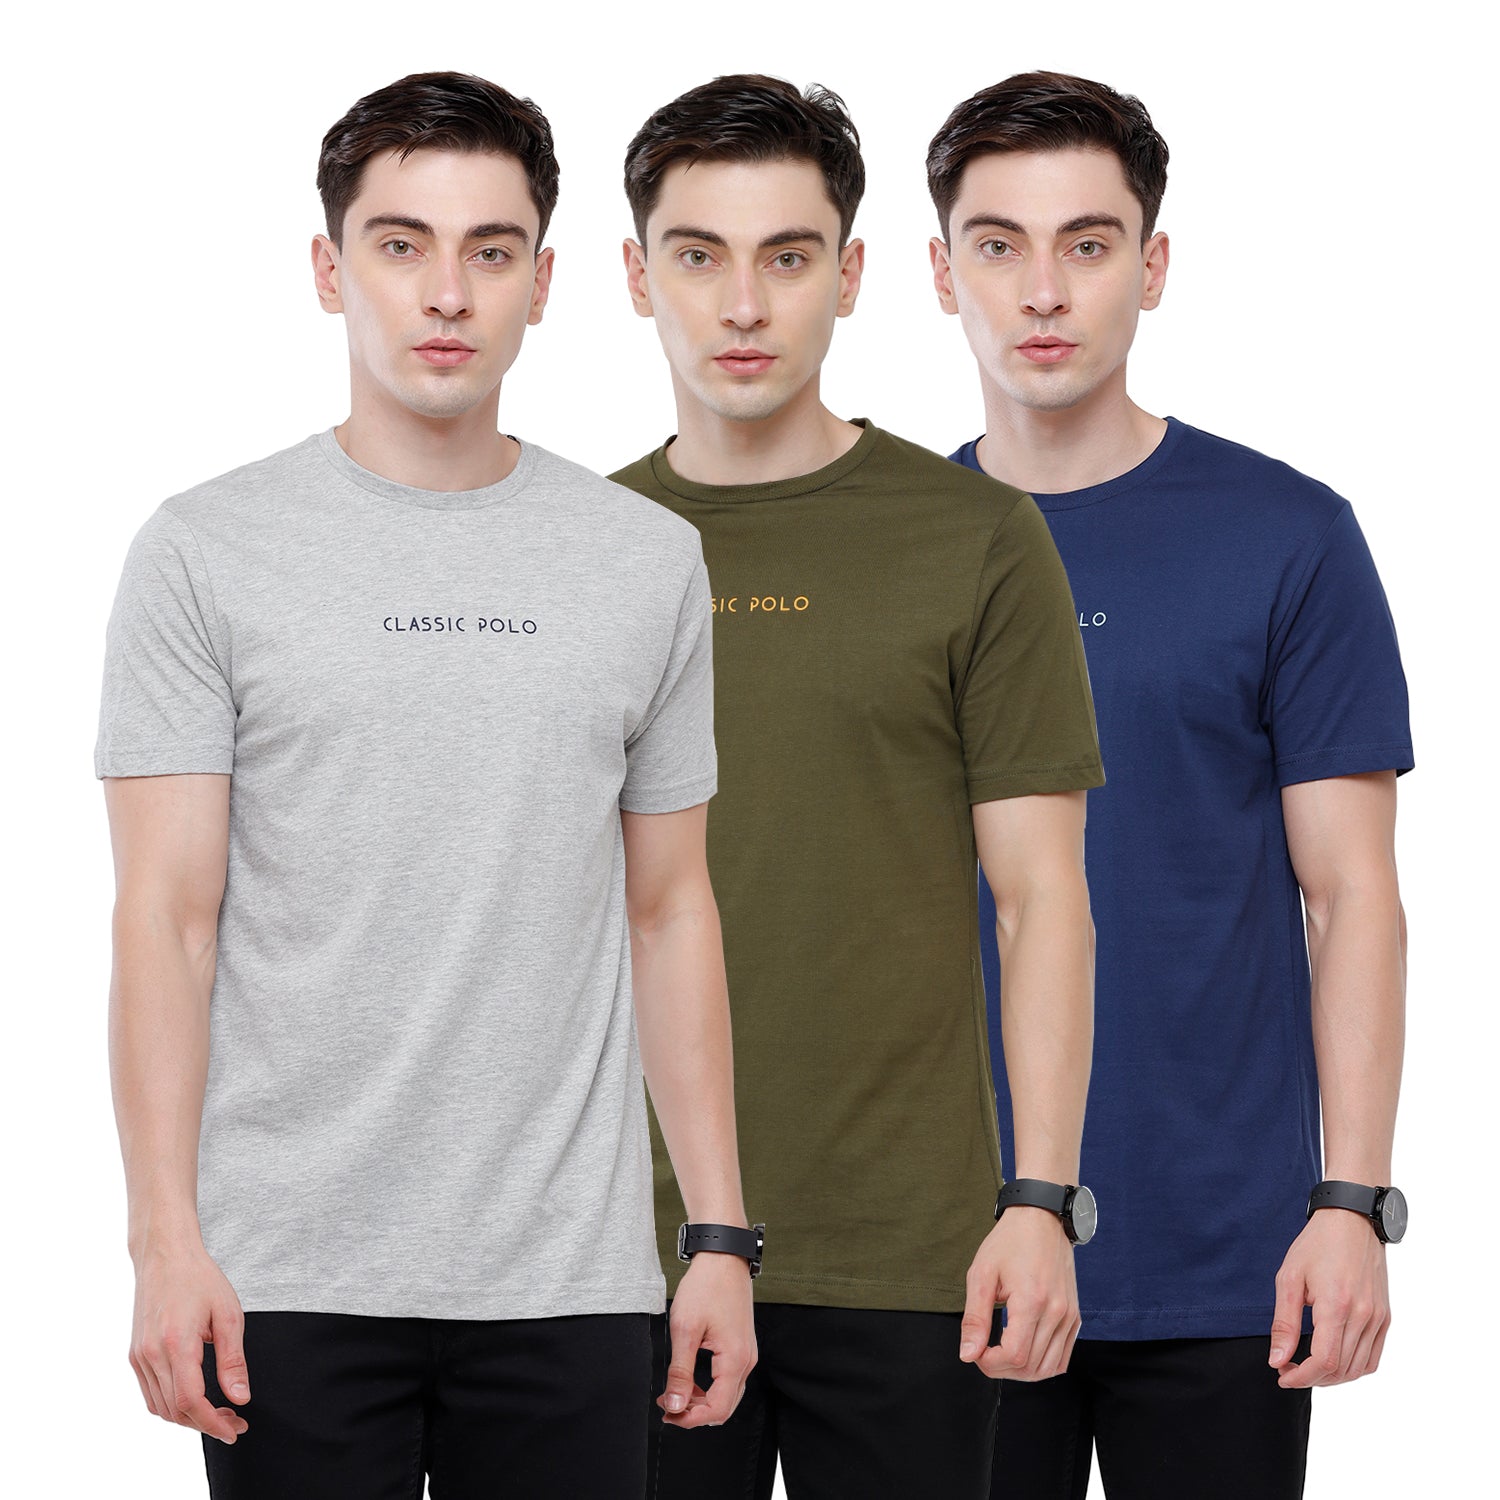 Classic polo Men's Basic Solid Single Jersey Crew Half Sleeve Slim Fit T-Shirt ( Trio Pack) - Ceres - 05 Classic Polo 